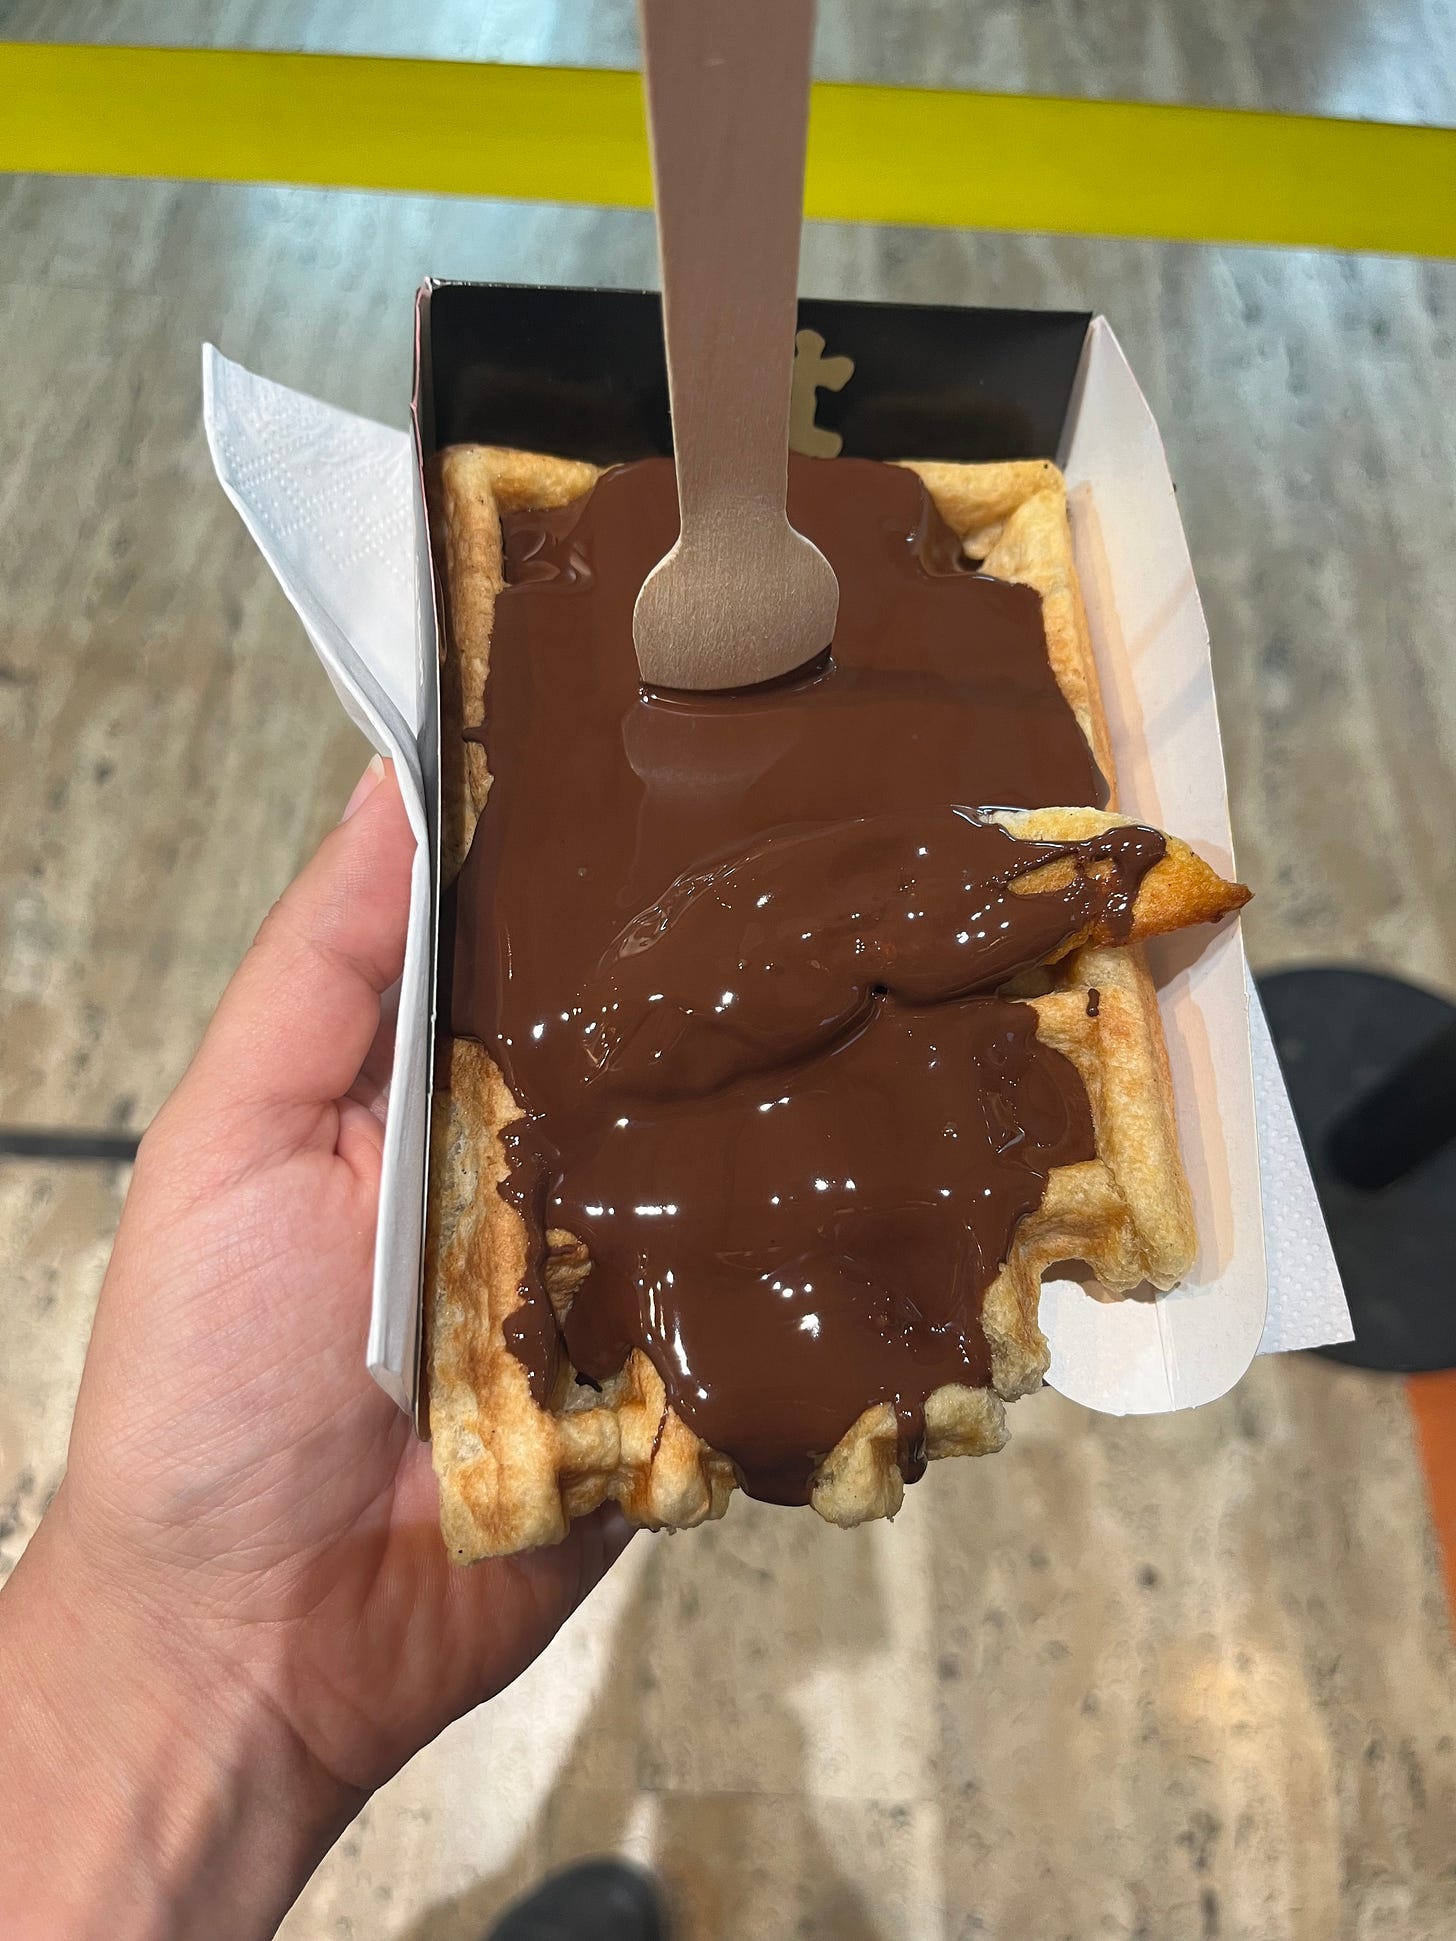 gluten-free waffle covered in chocoalte from veganwaf in brussels